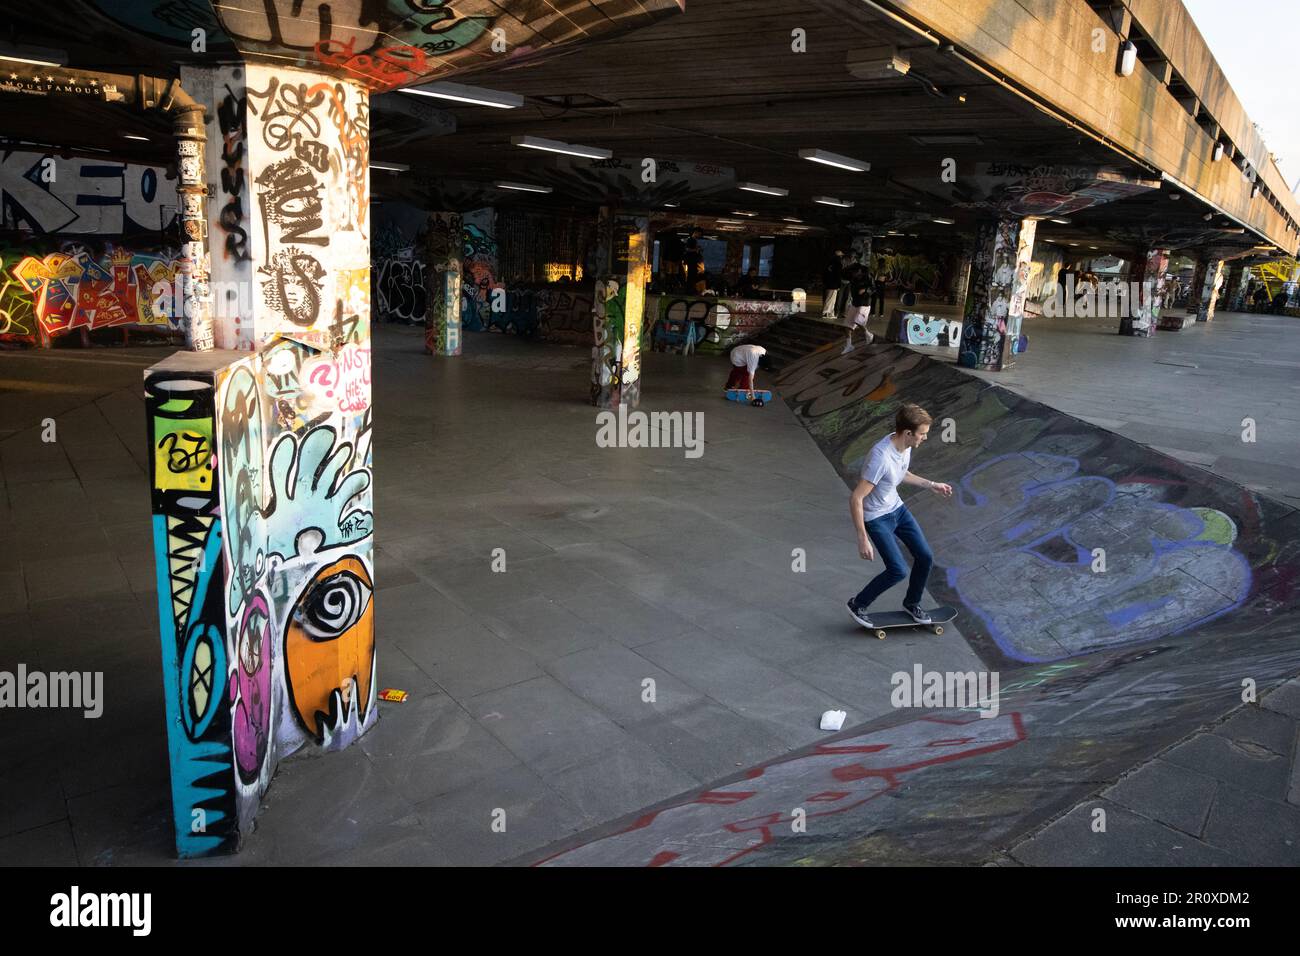 Southbank Skate Space, The undercroft of the Southbank Centre widely recognised as the birthplace of British skateboarding, London, England, UK Stock Photo